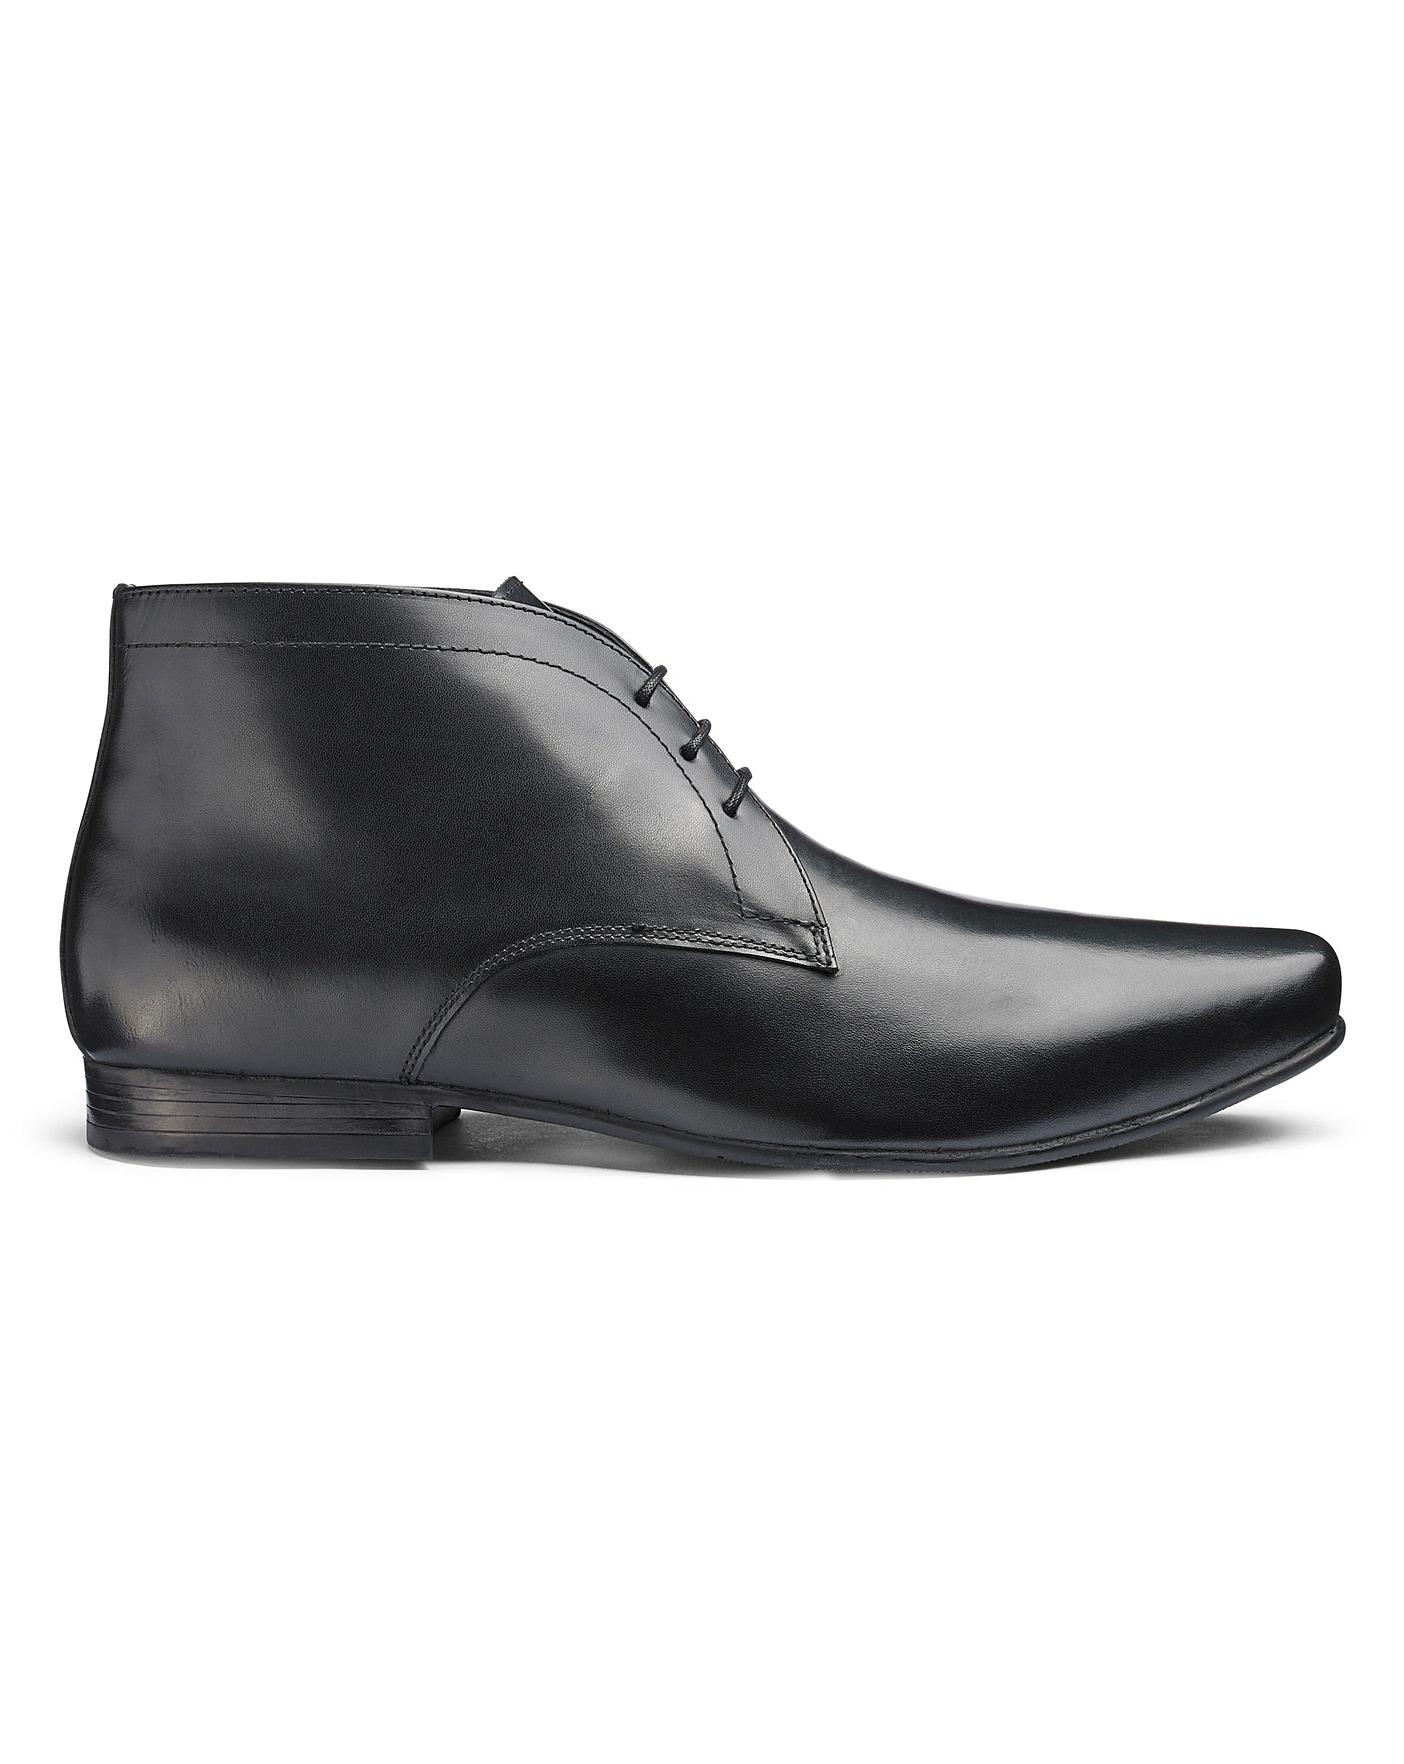 Leather Formal Chukka Boots Extra Wide